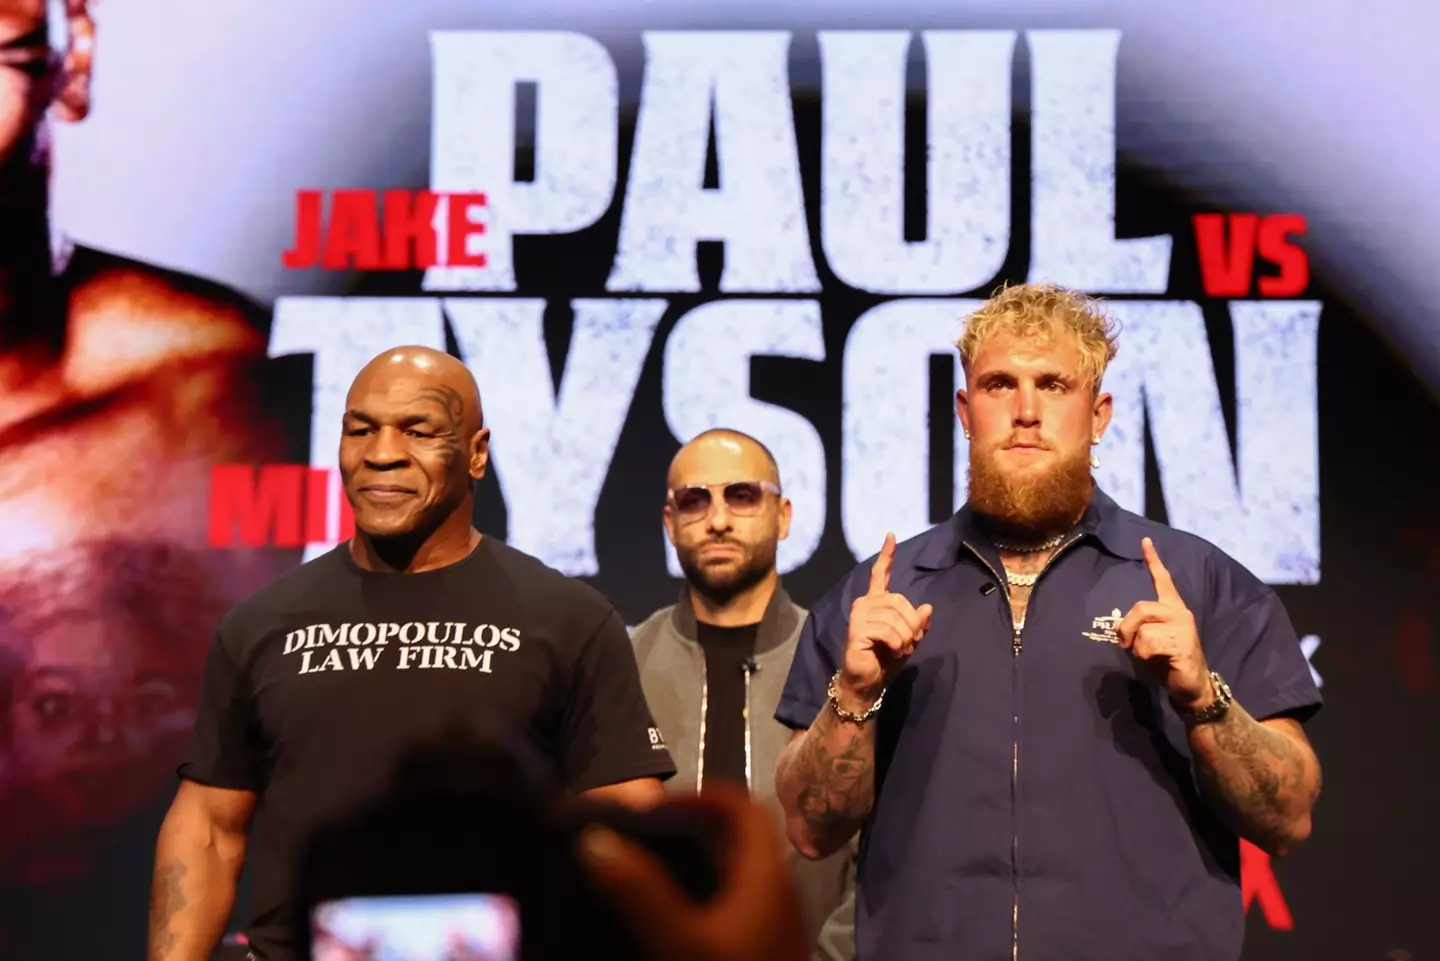 Tyson and Paul's fight will be streamed live on Netflix on 20 July. (Ed Mulholland / Sportsfile via Getty Images)